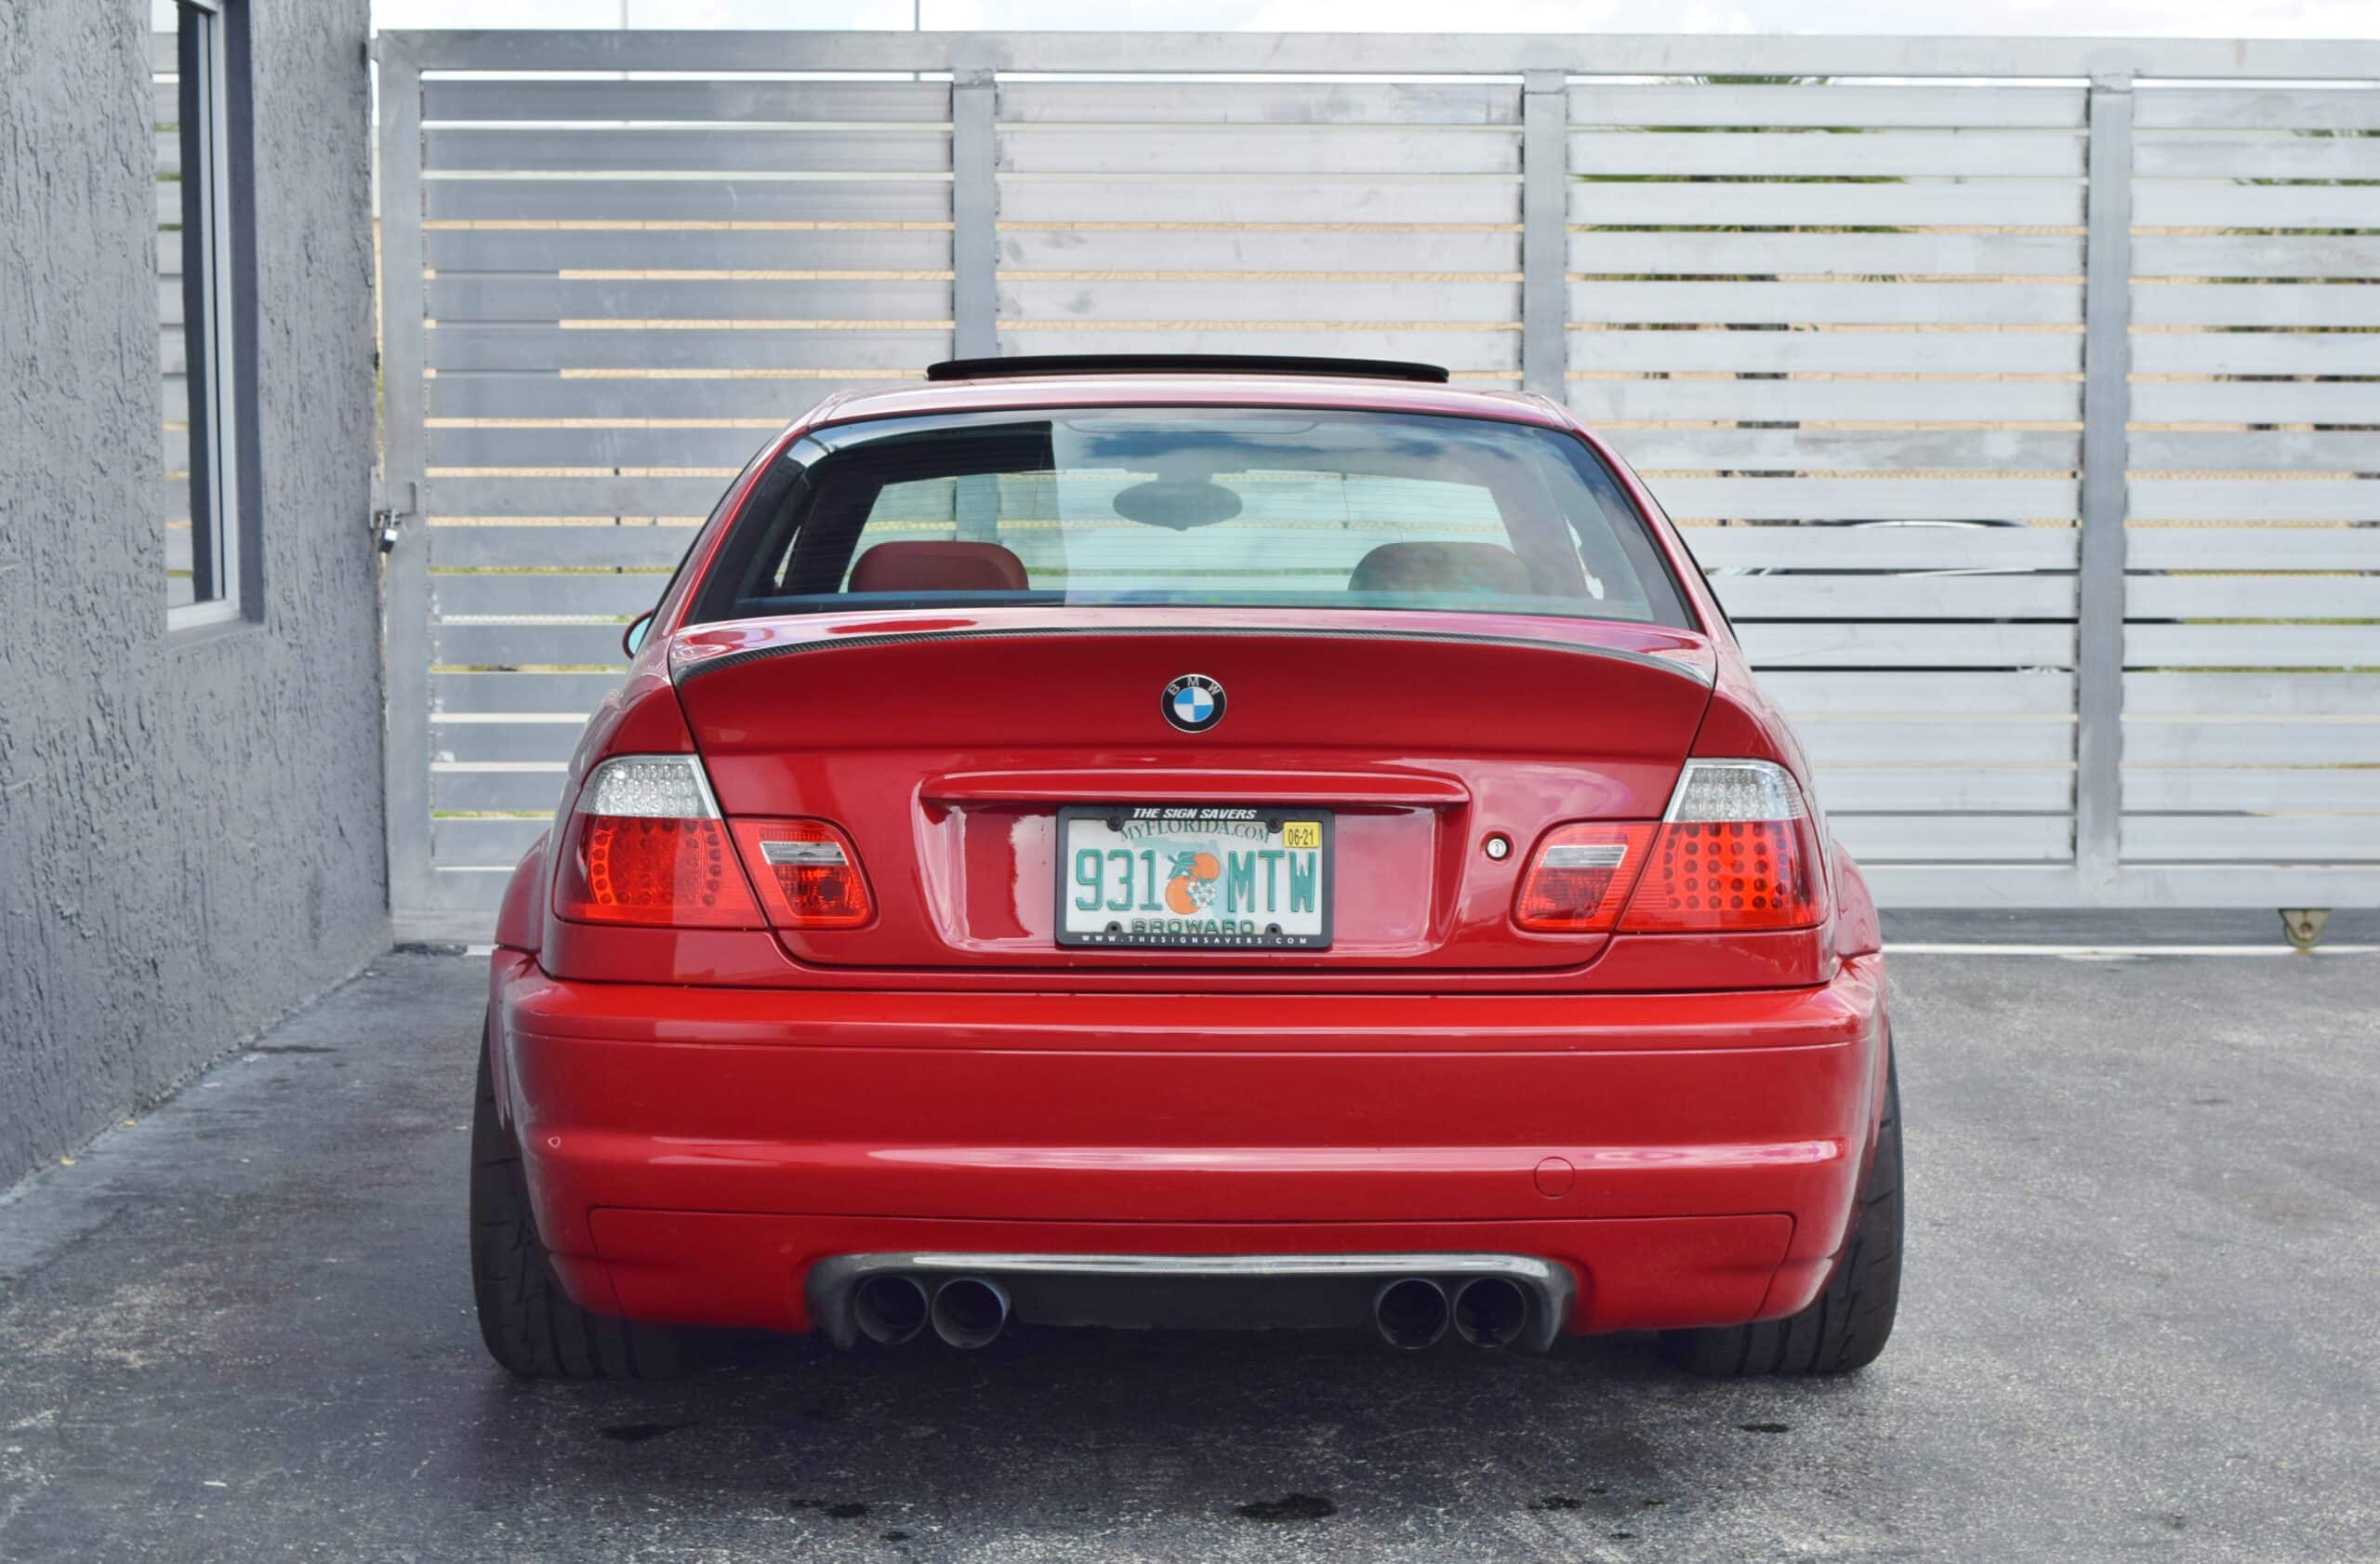 2002 BMW M3 E46 6 Speed Manual Imola Red/Red interior Supercharged-Airlift Suspension-Over $40,000 in Reciepts